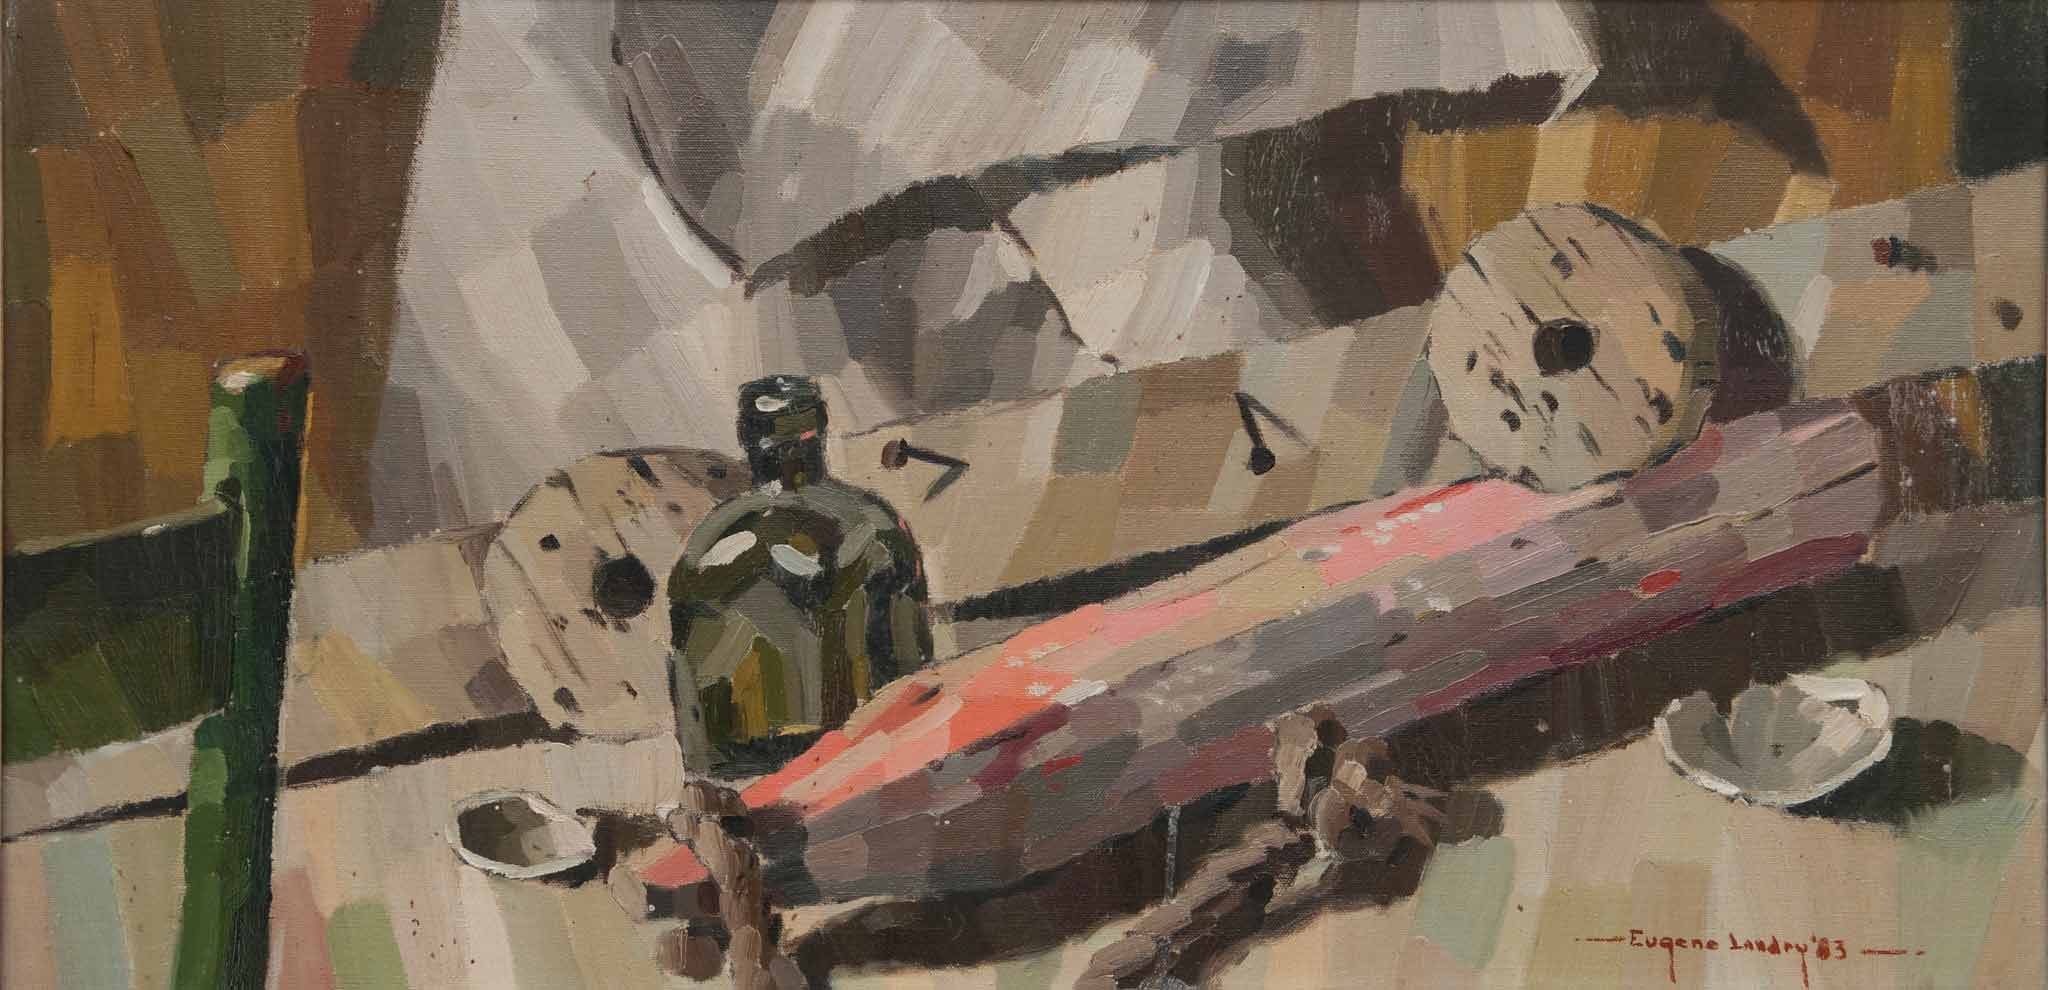 Still life with pink float: 20x24” oil on canvas, 1963